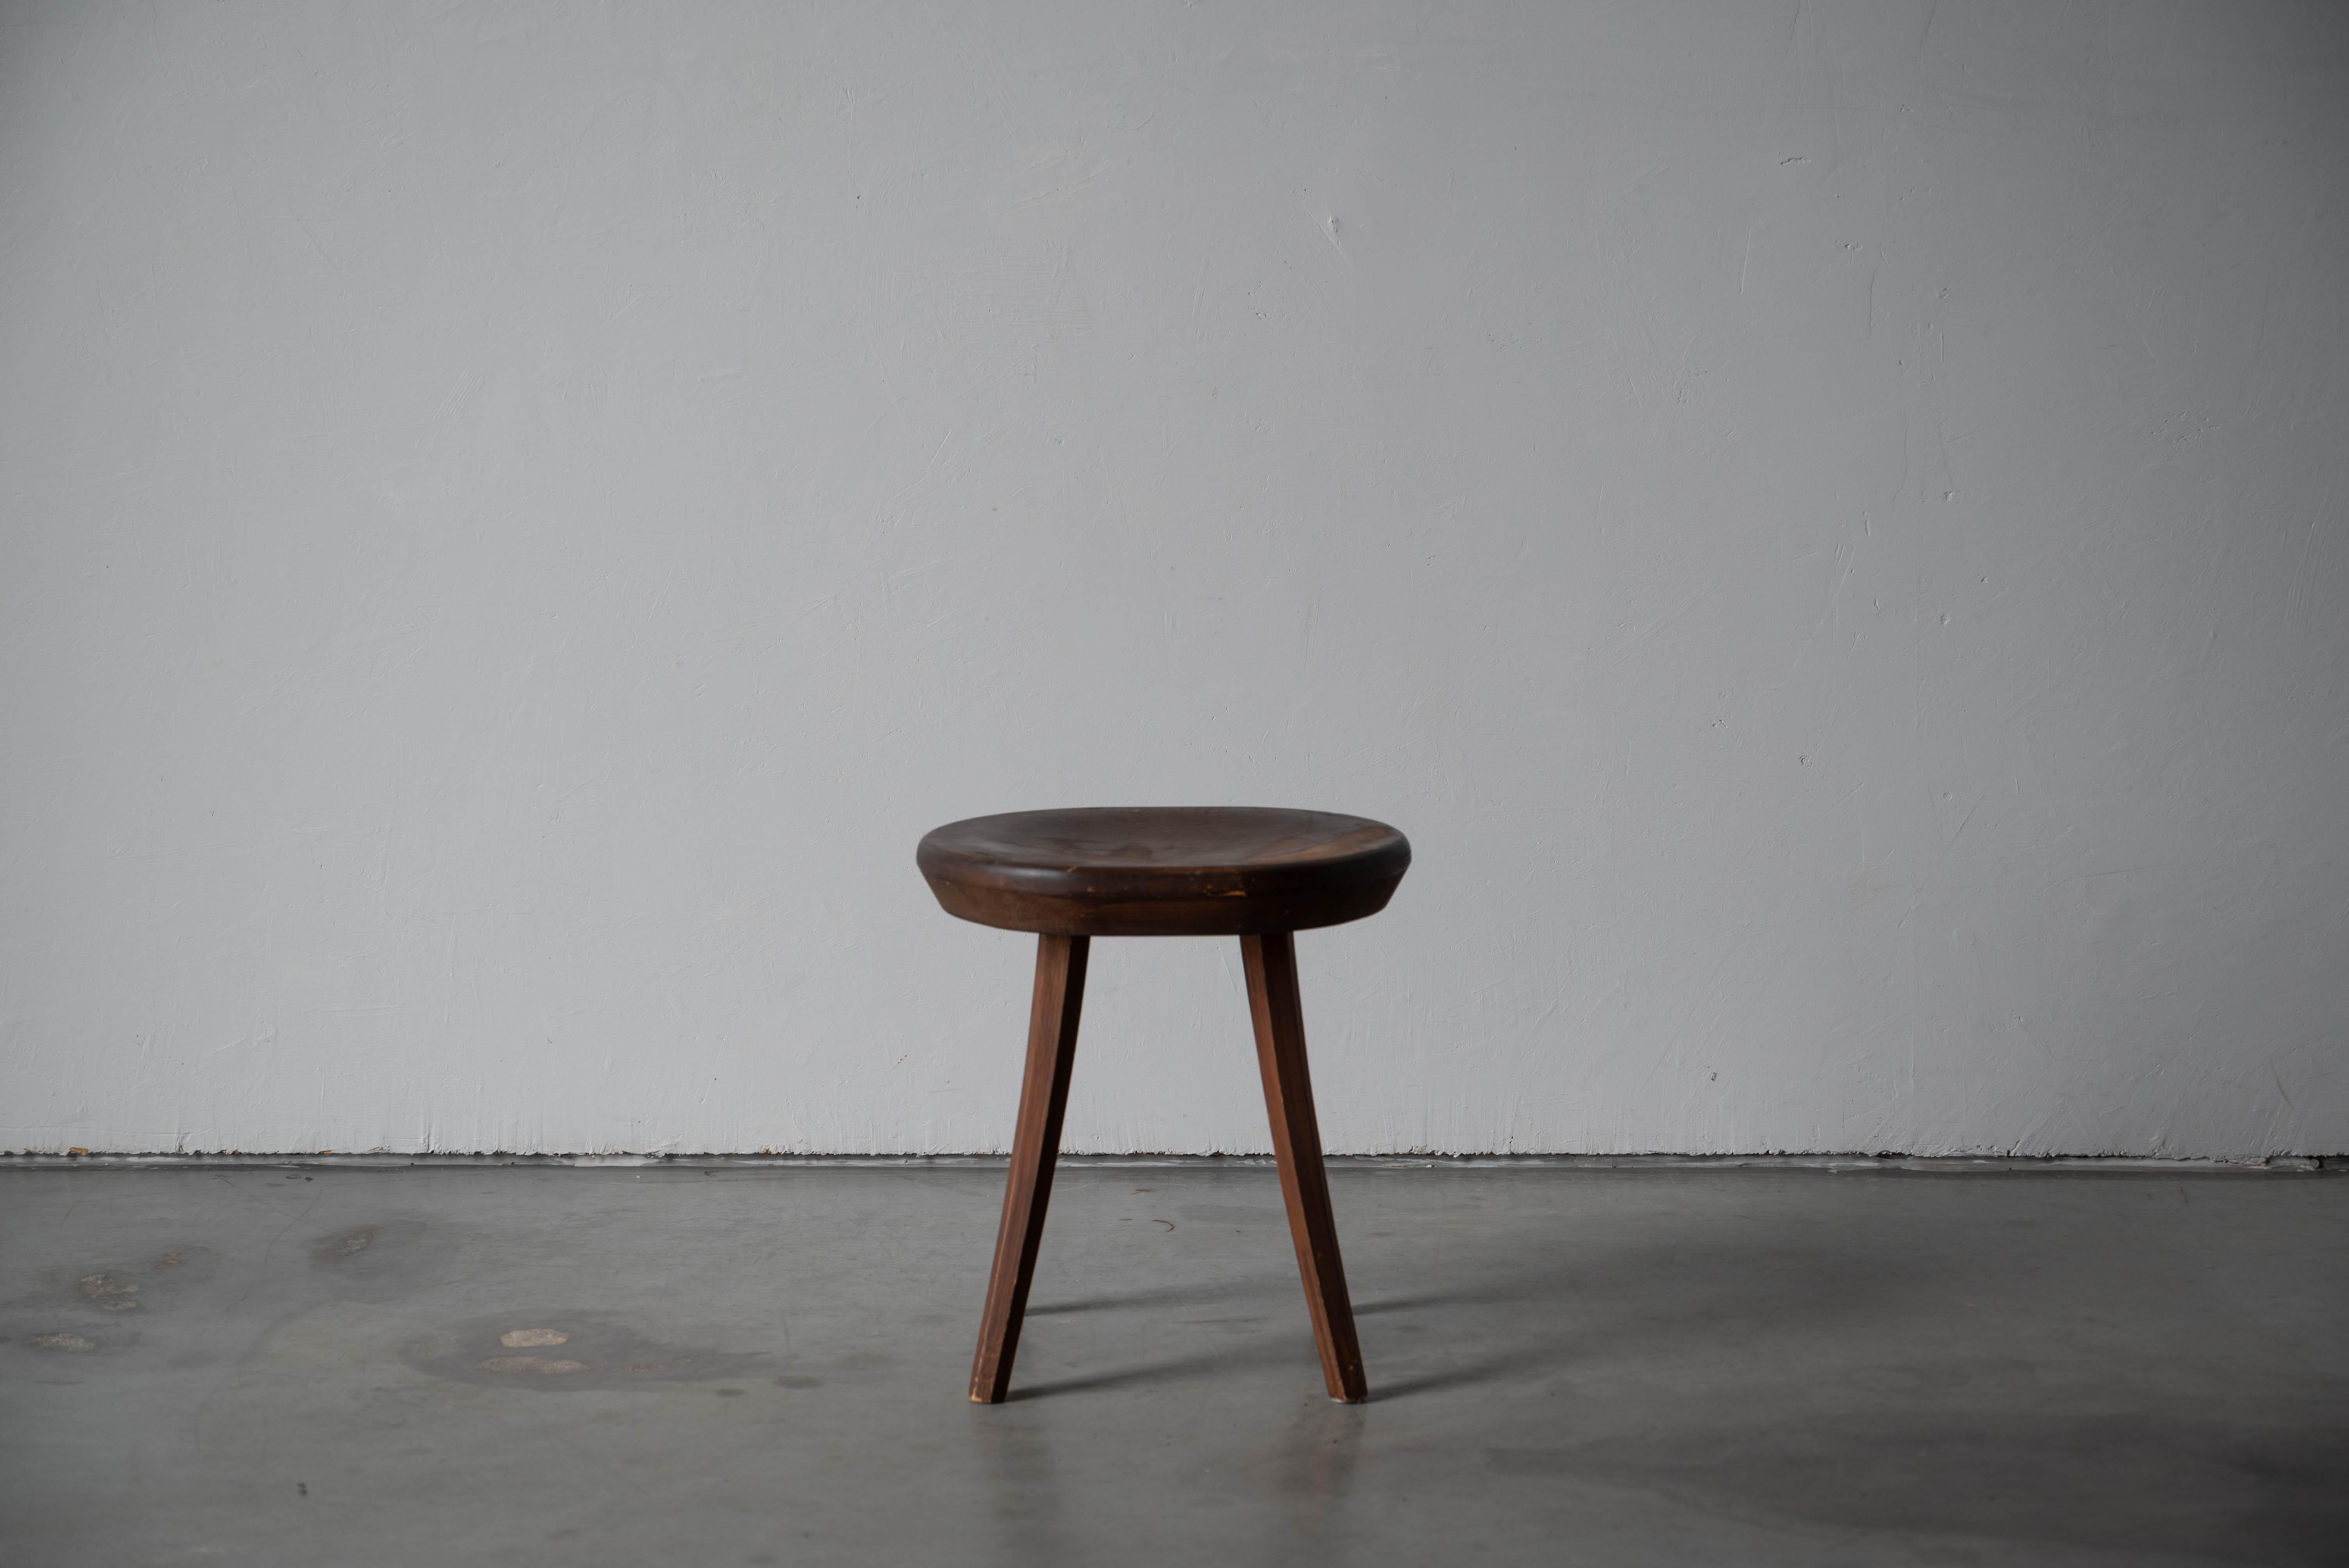 A stained pine stool designed and produced by Tervasaaren Puutyötehdas, Finland, 1960s.